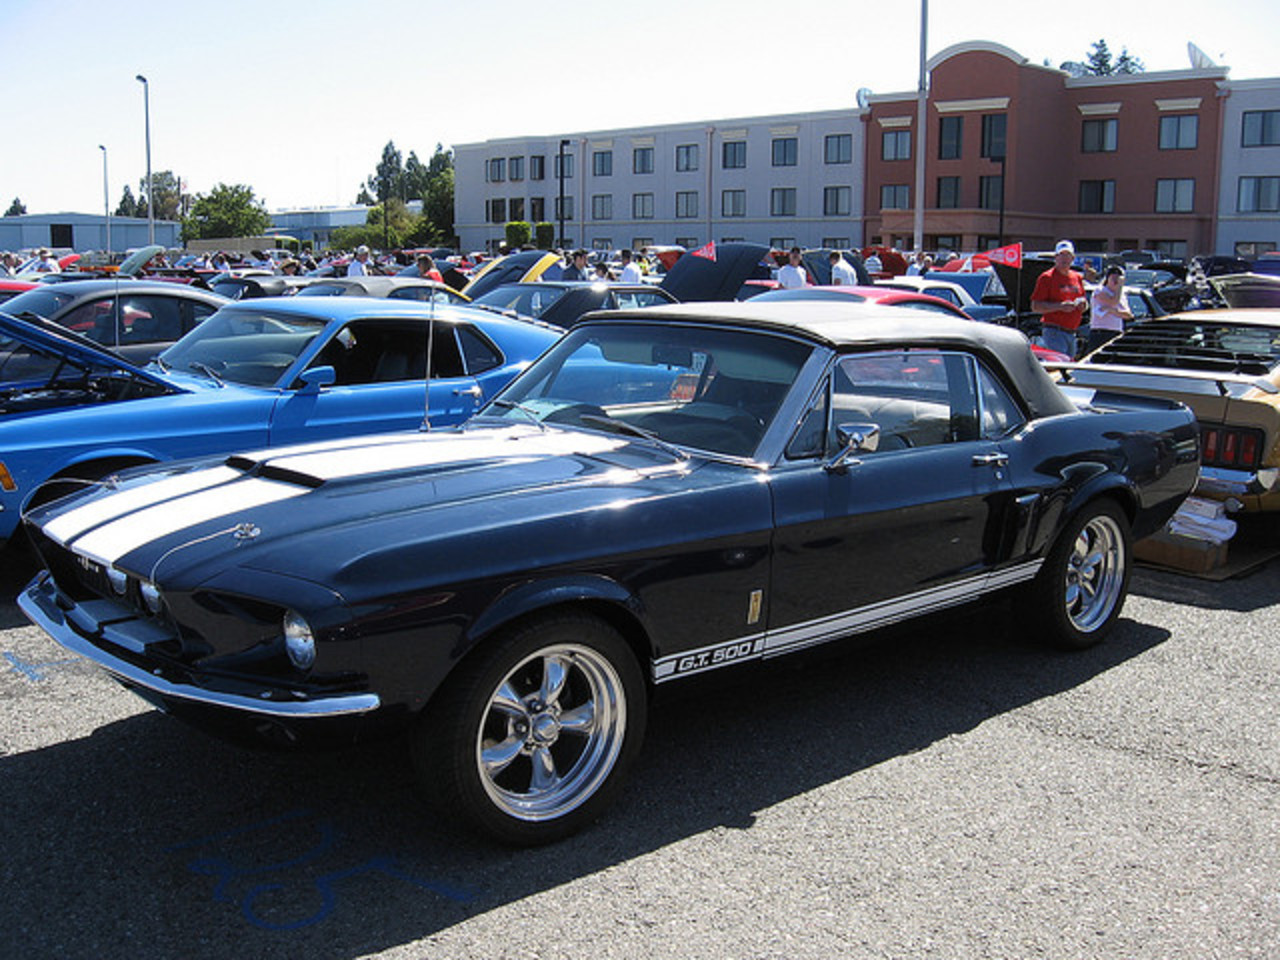 1967 Shelby Mustang GT-500 Convertible | Flickr - Photo Sharing!